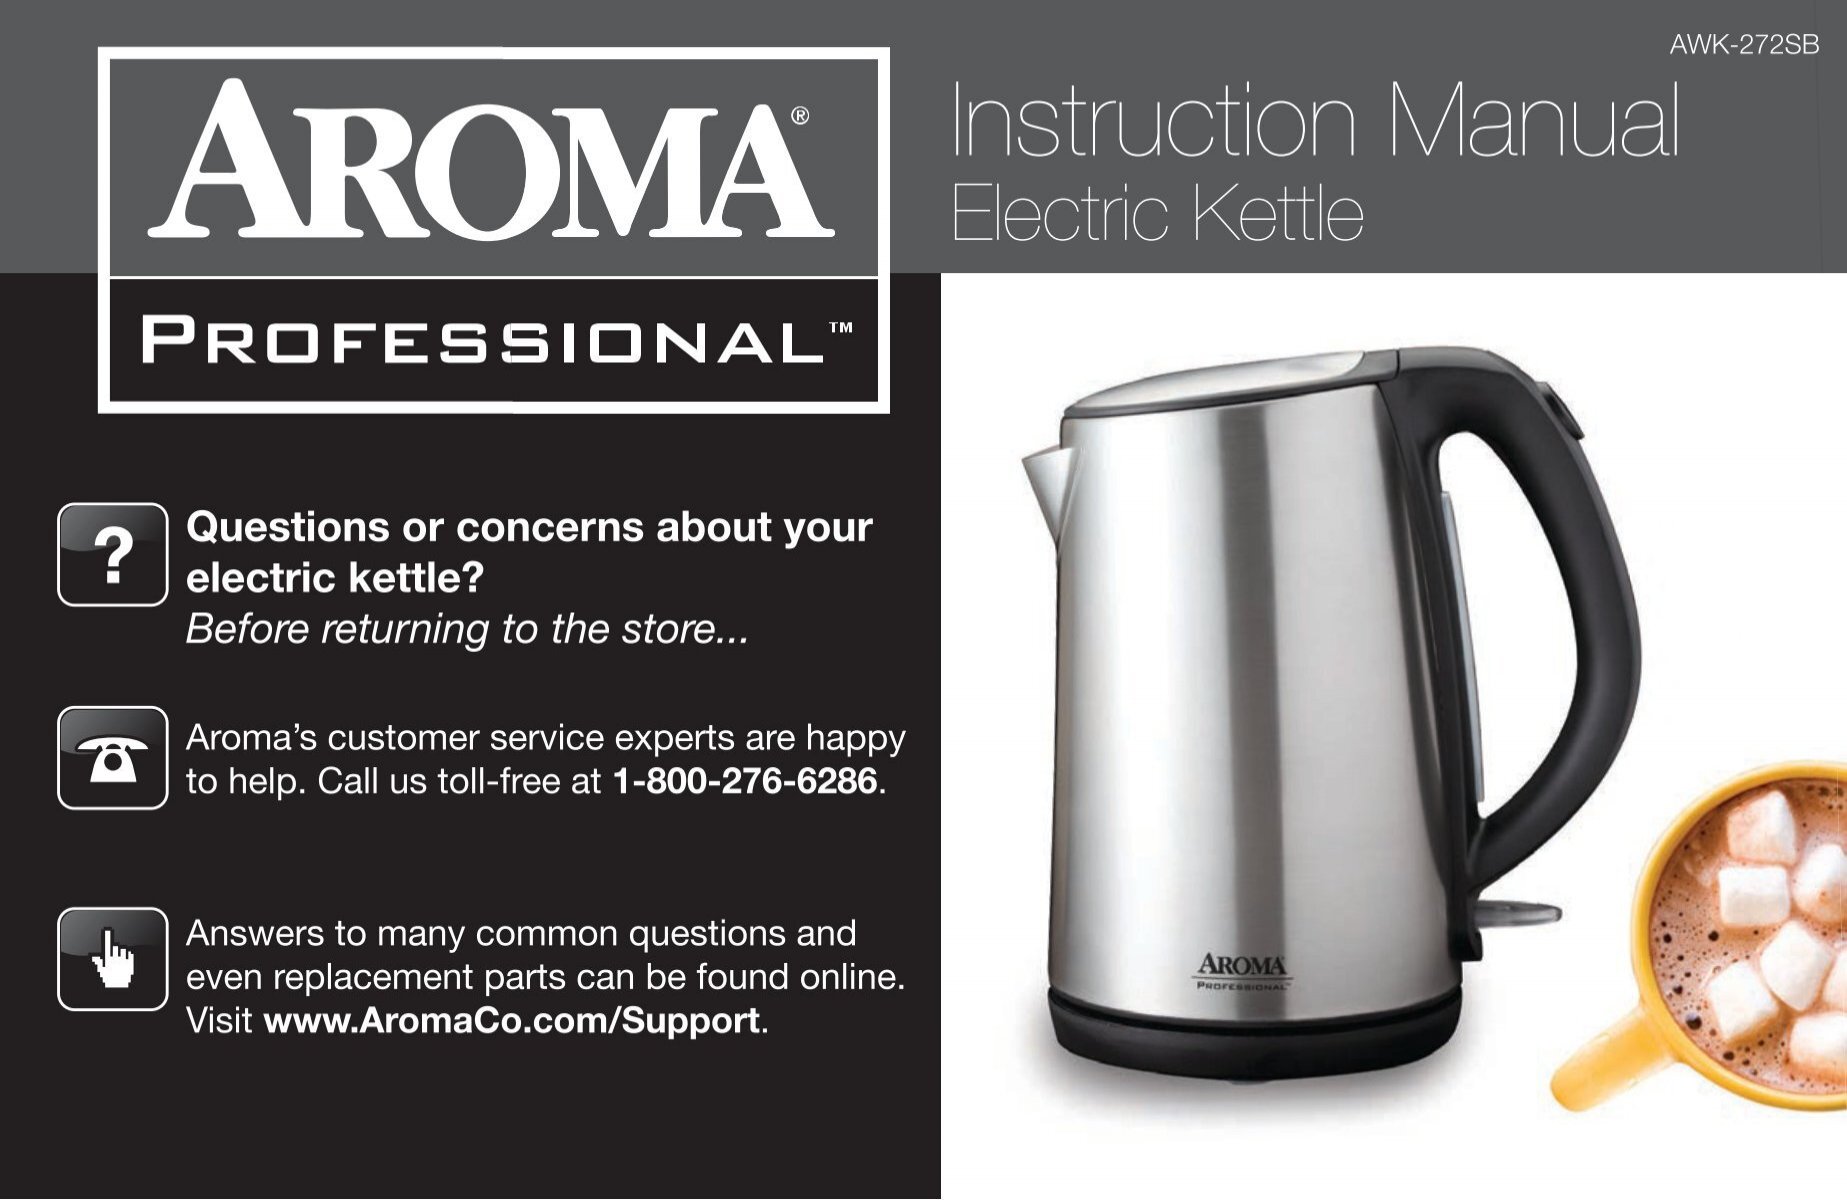 aroma electric kettle 1.7 litre